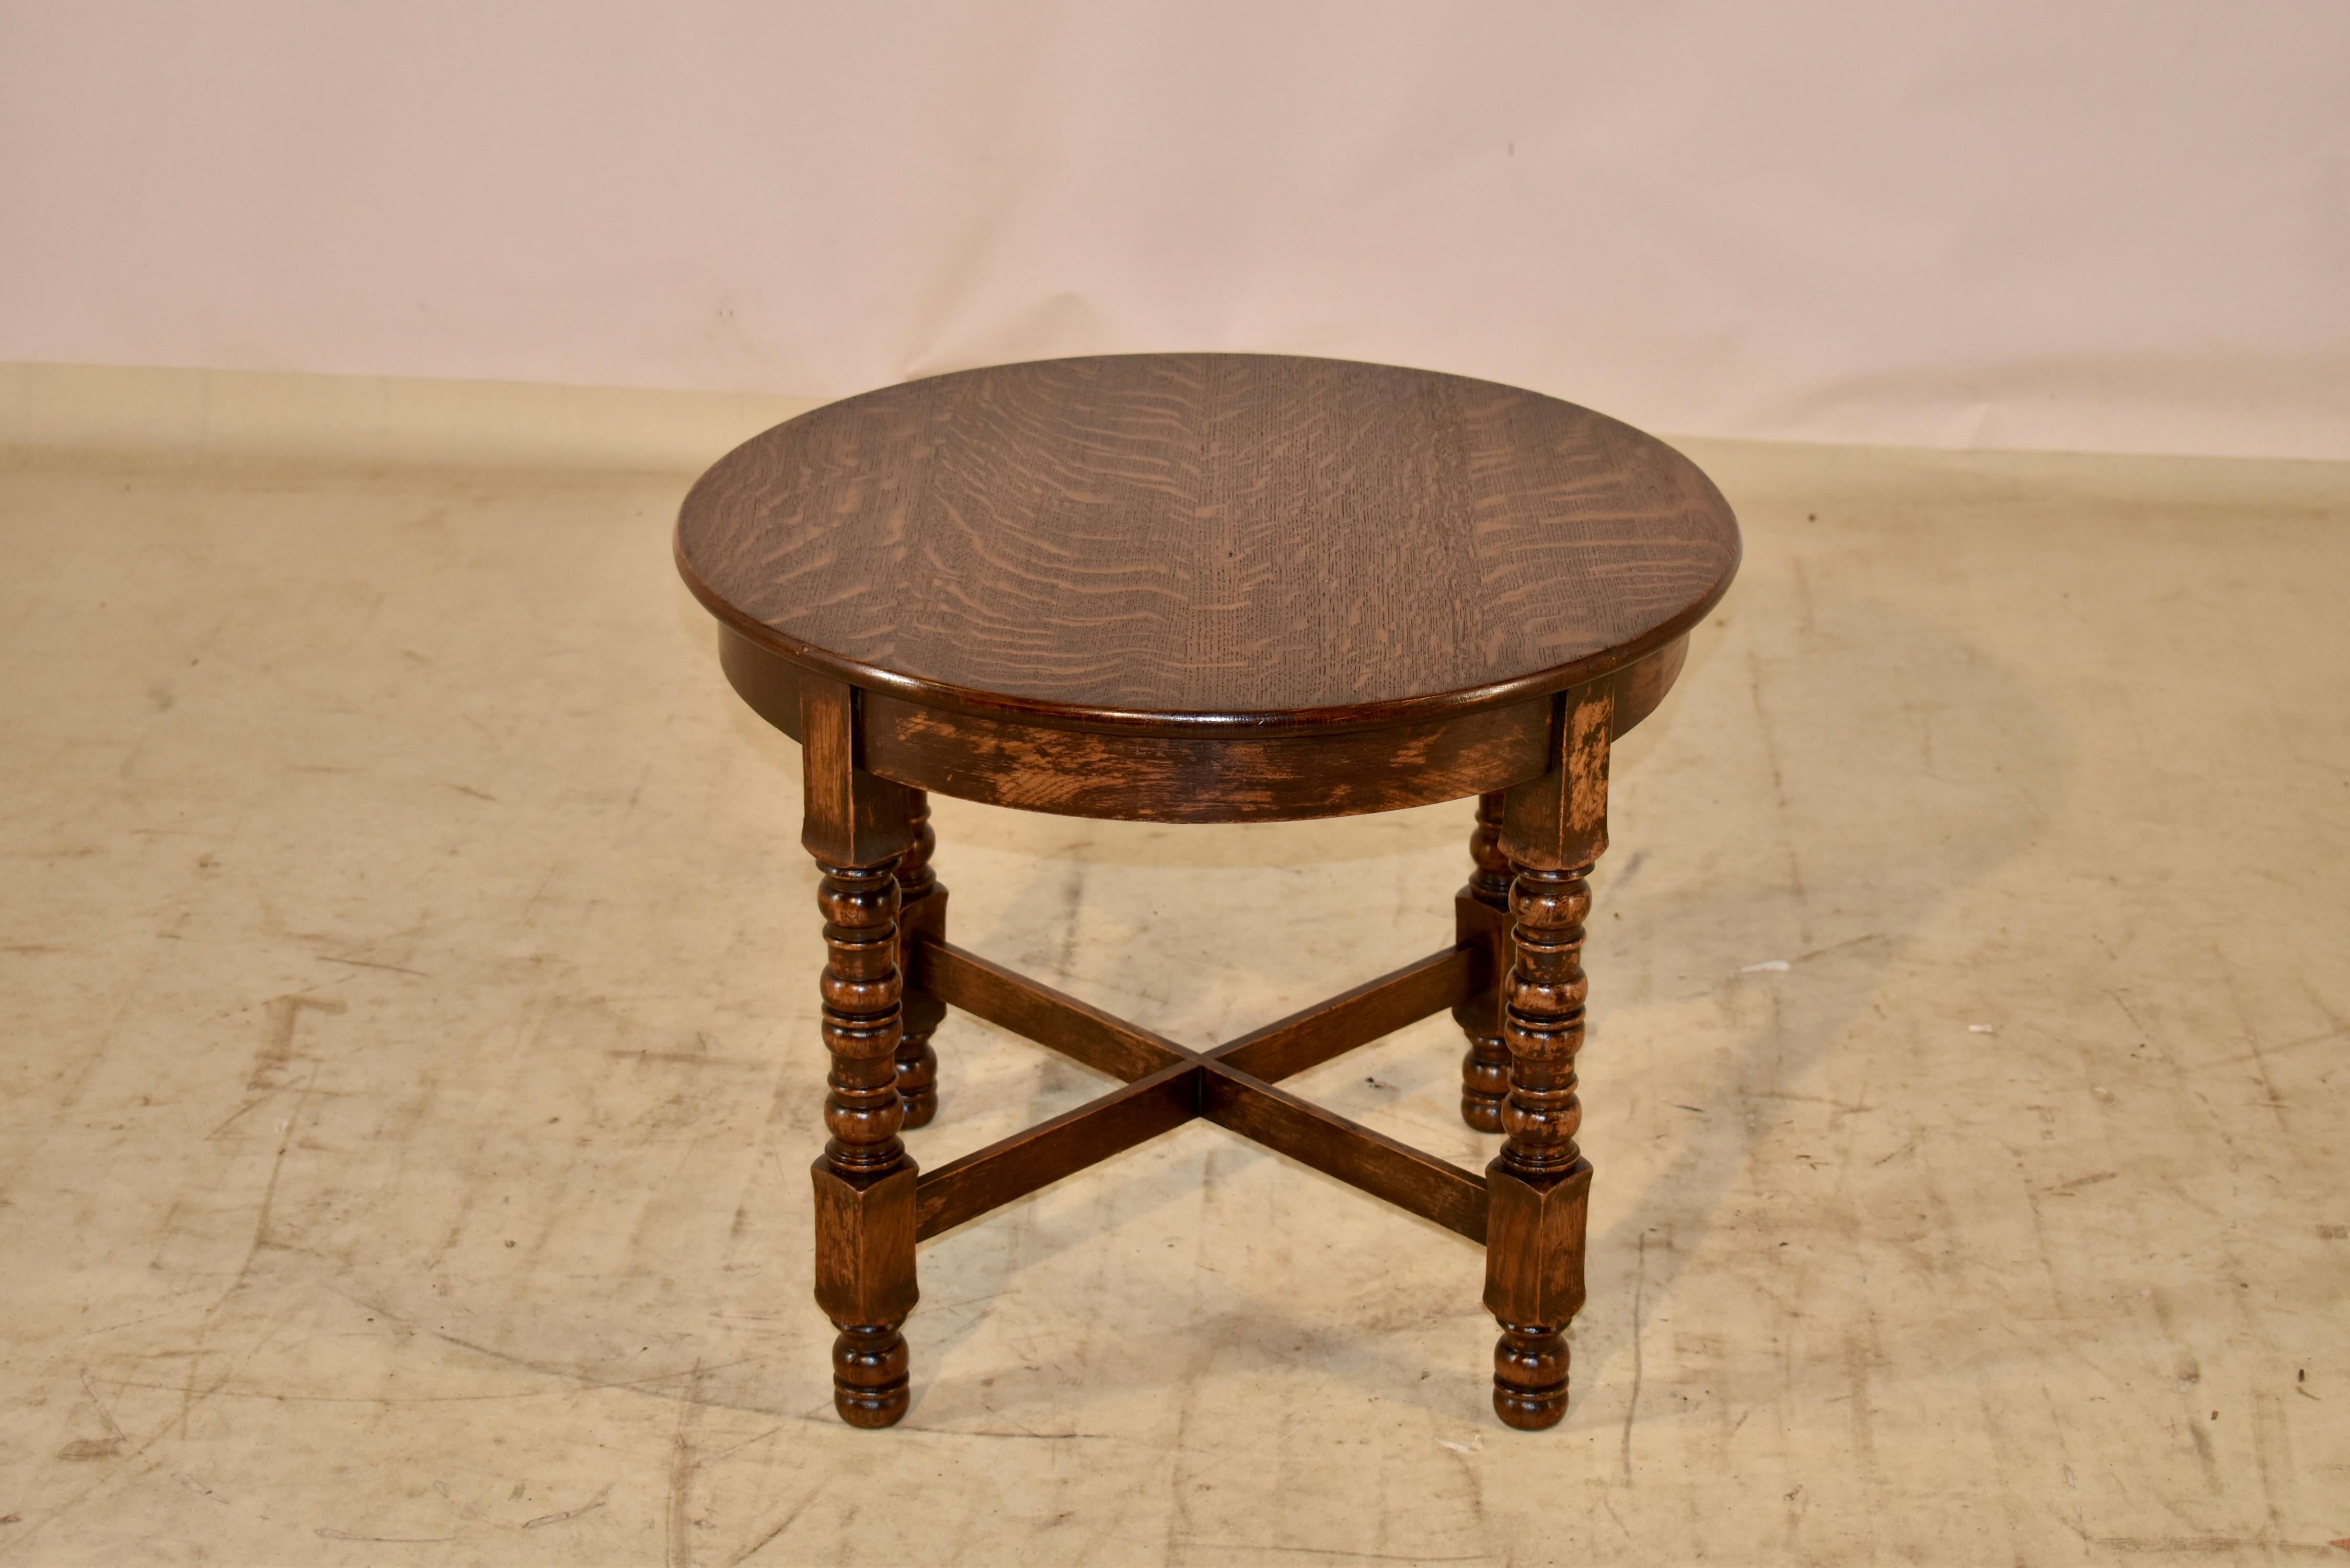 Edwardian oak side table, circa 1900. The top has lovely graining and follows down to a simple apron. The table is supported on hand turned legs, which are joined by simple cross stretchers. This is a wonderful little occasional table that could be